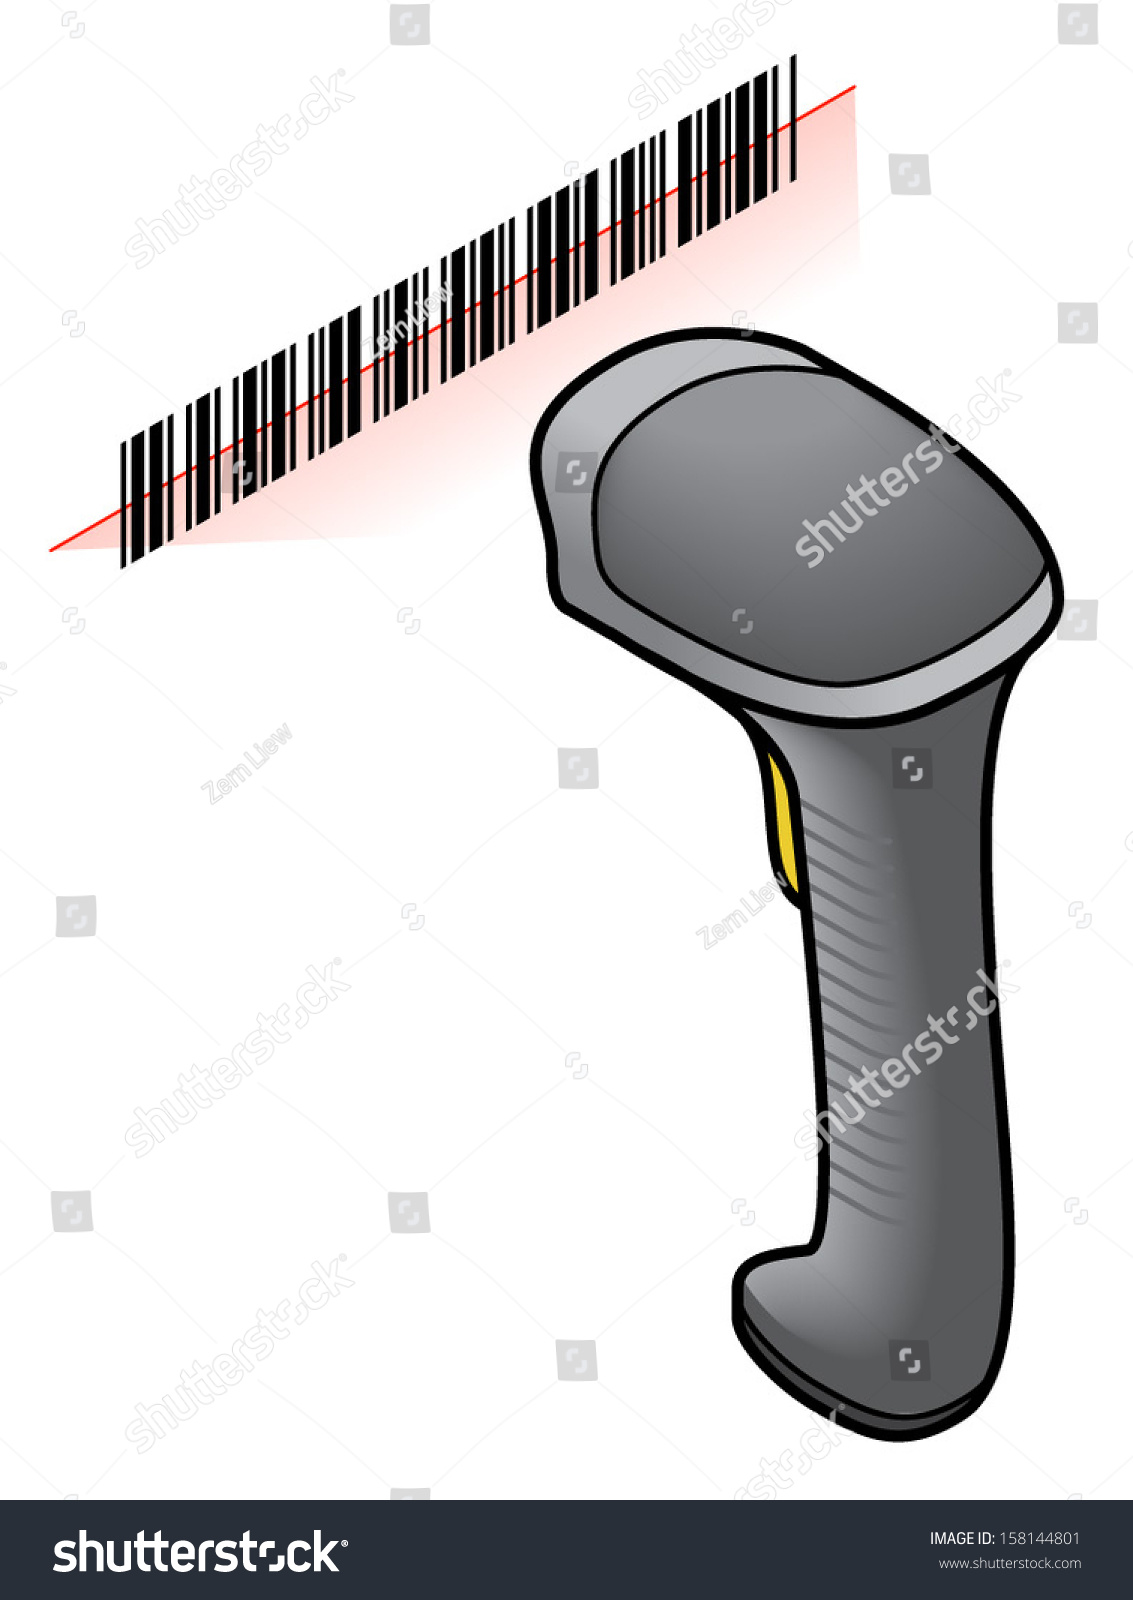 barcode scanner clipart - photo #26